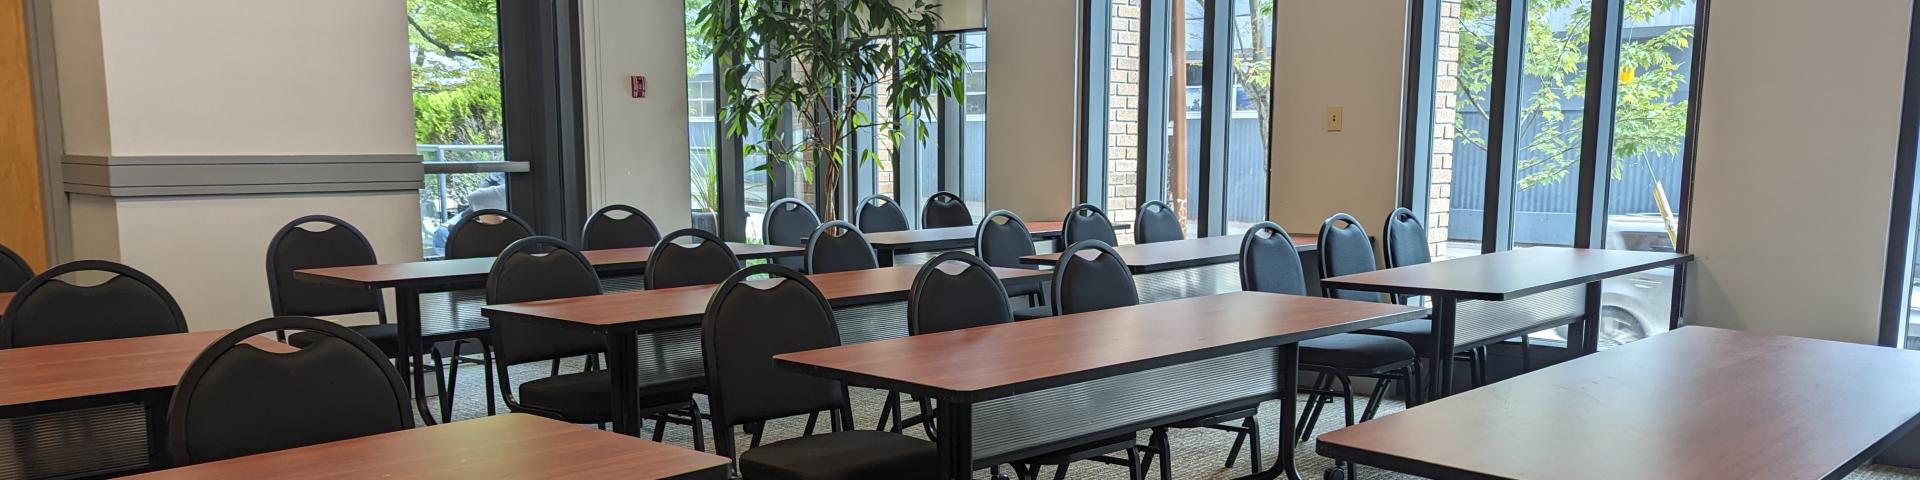 Meeting Room Rentals in Downtown Vancouver